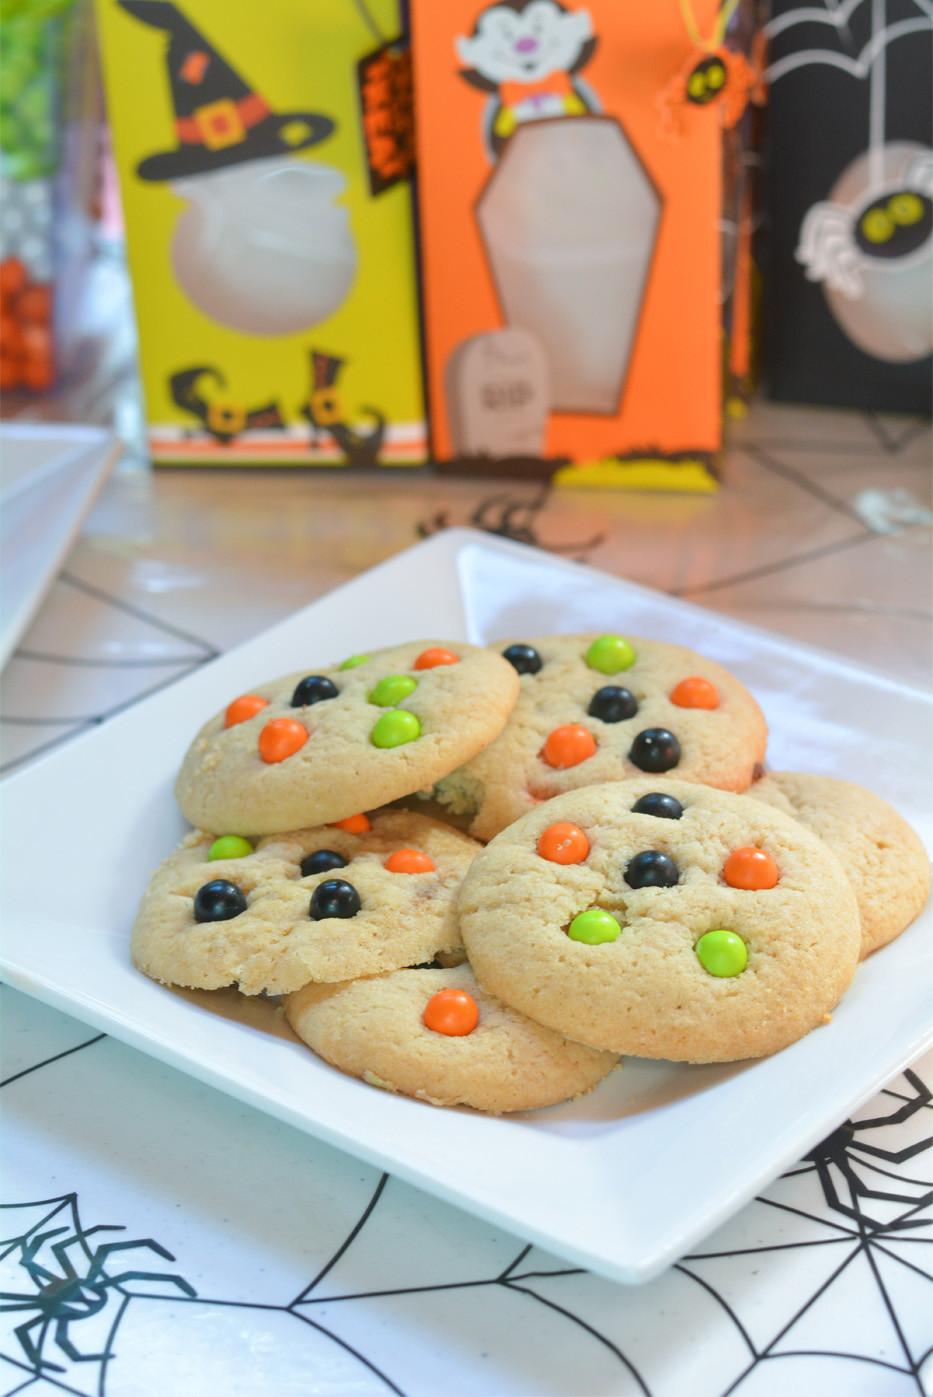 Homemade Halloween Cookies
 Spooky Monster Cookies Mommy s Fabulous Finds